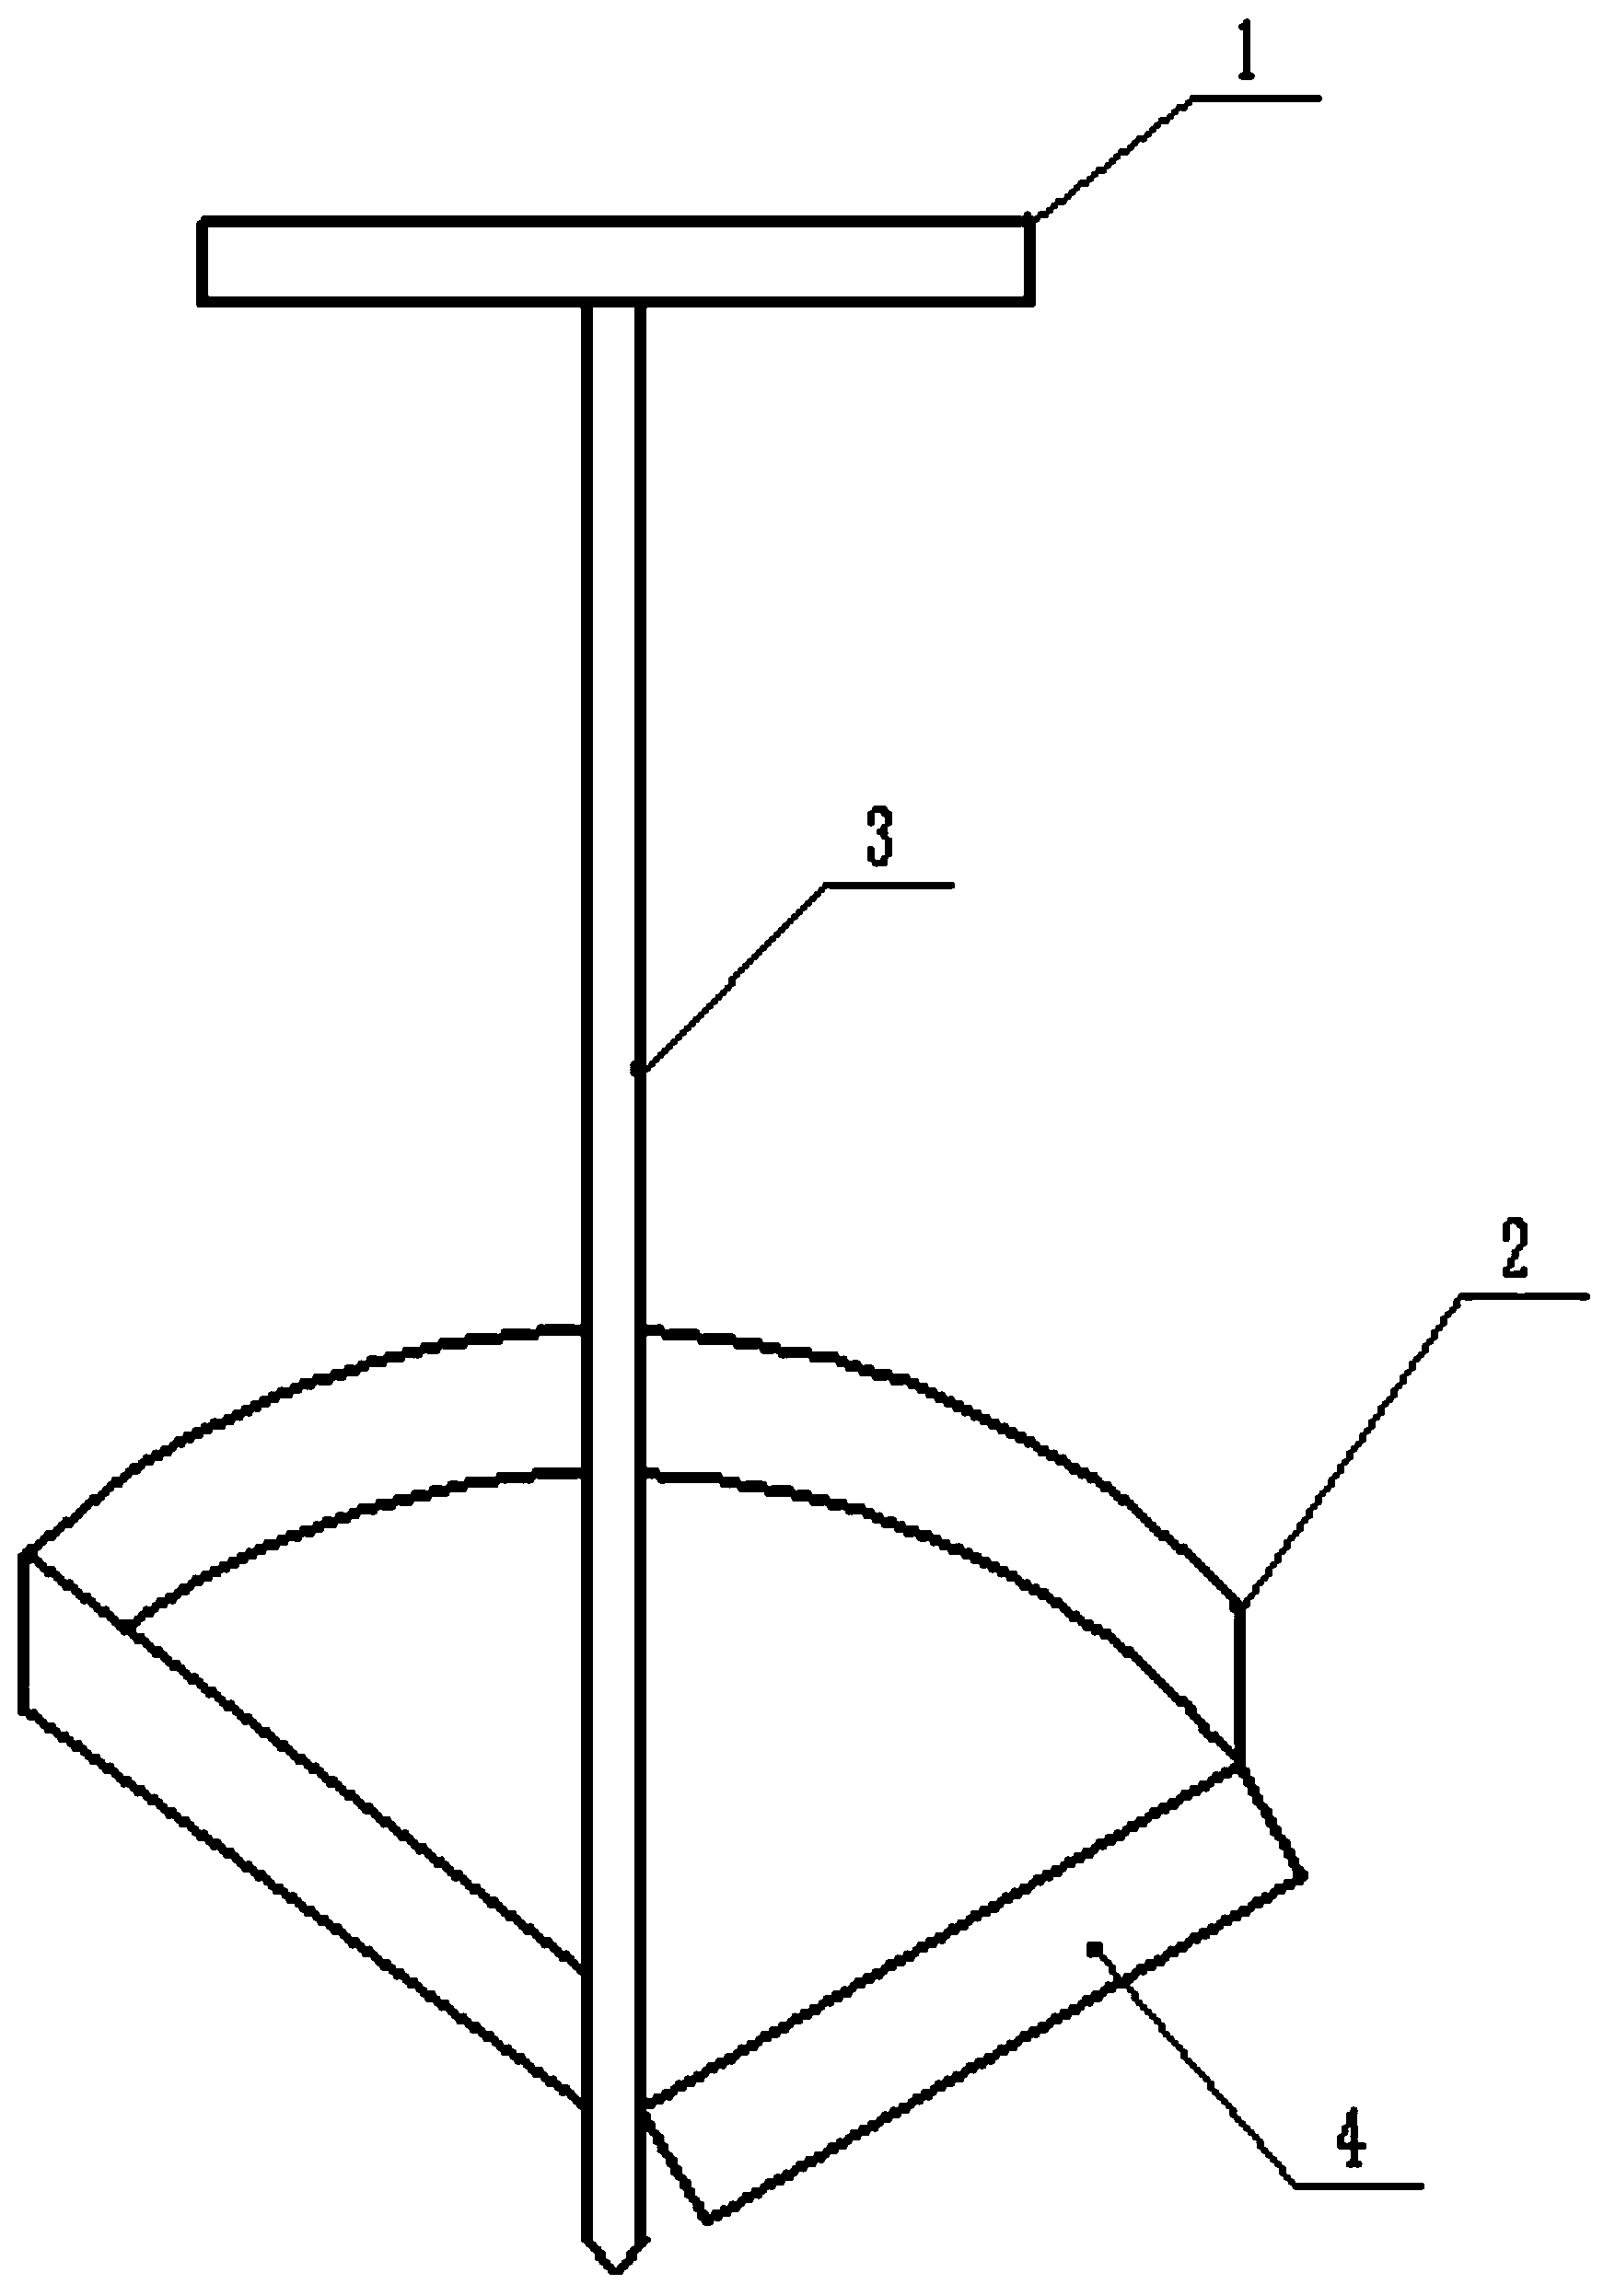 Pit earth carrying apparatus